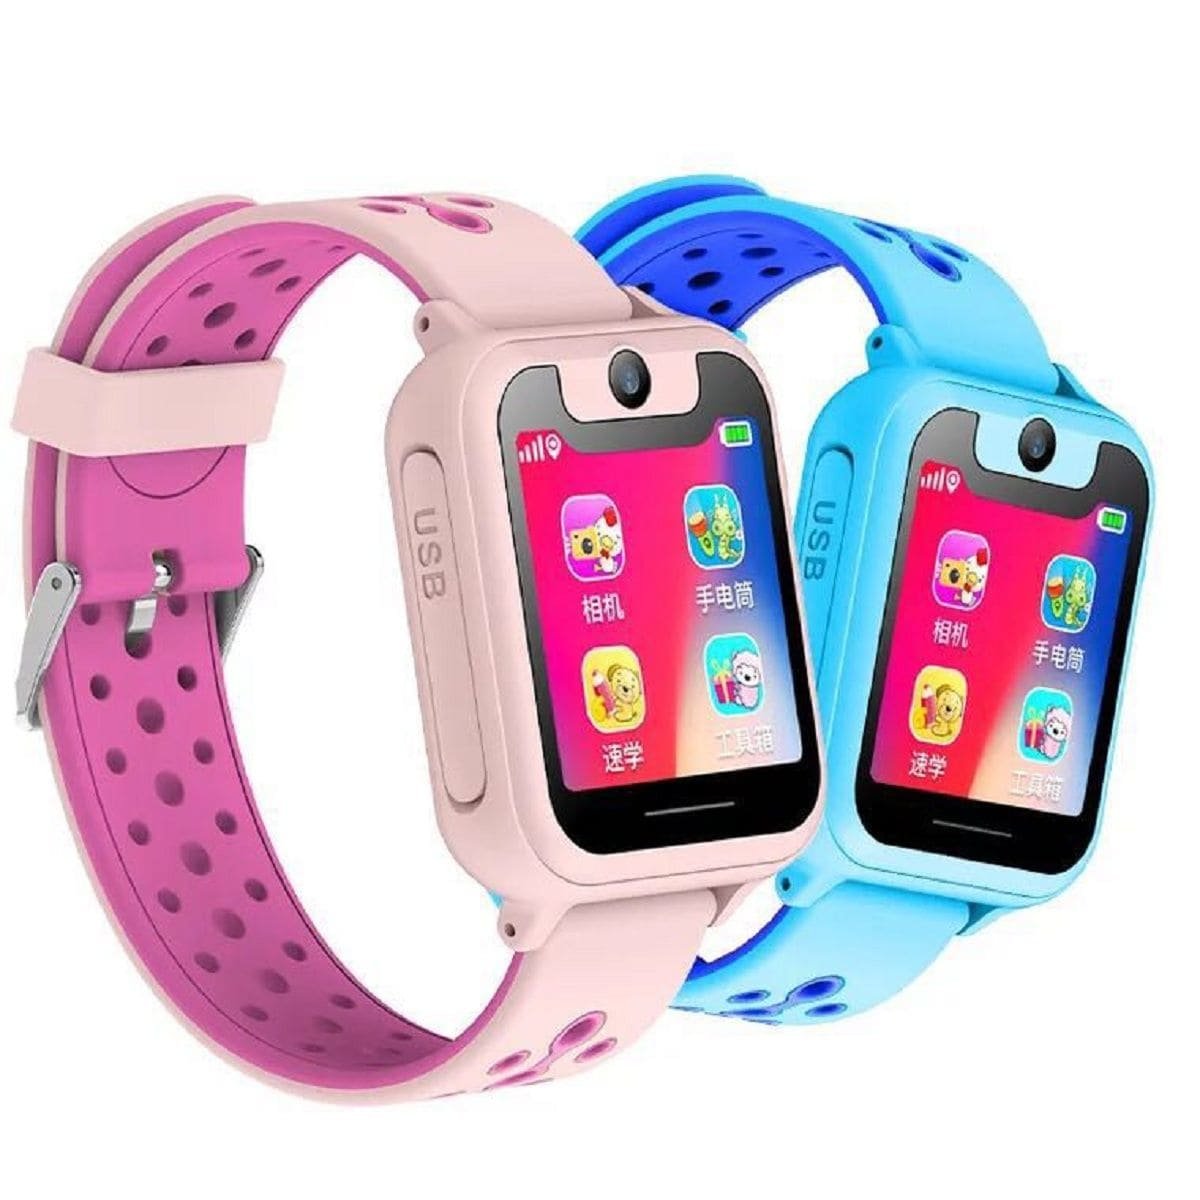 Kids Phone Watch: Easy and Secure Solution for Parents